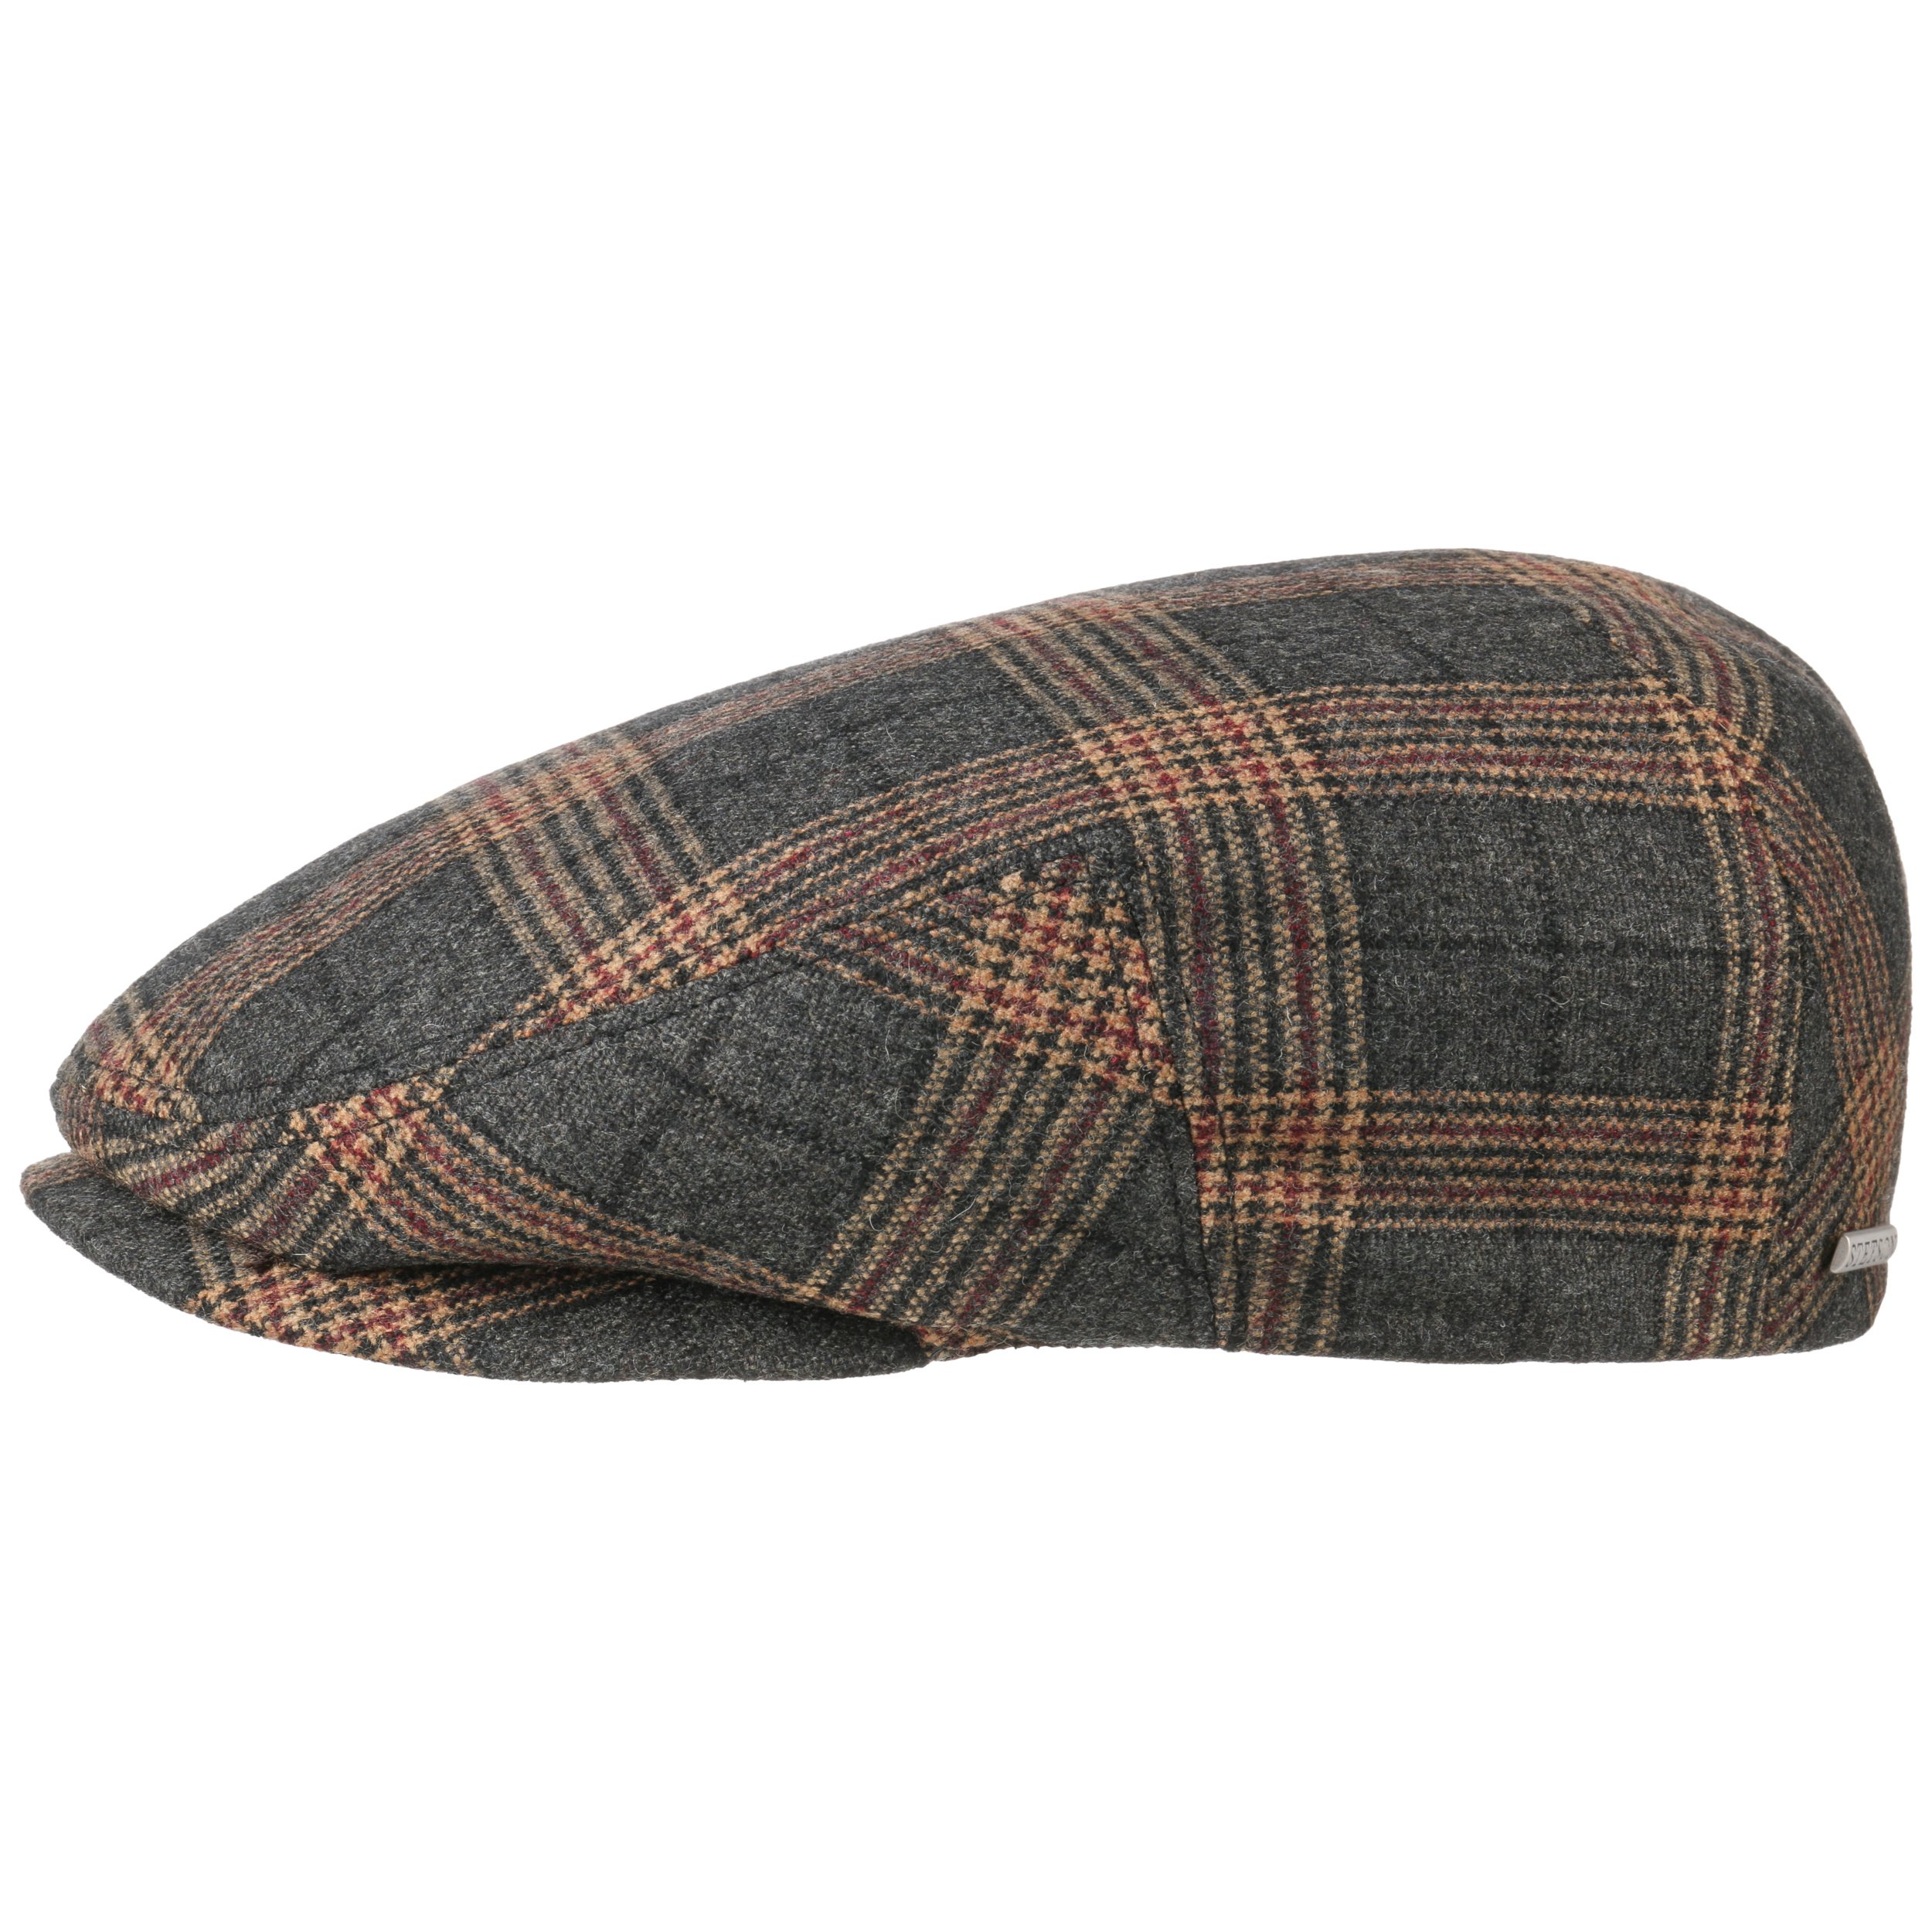 Kent Check Flat Cap with Ear Flaps by Stetson --> Shop Hats, Beanies ...